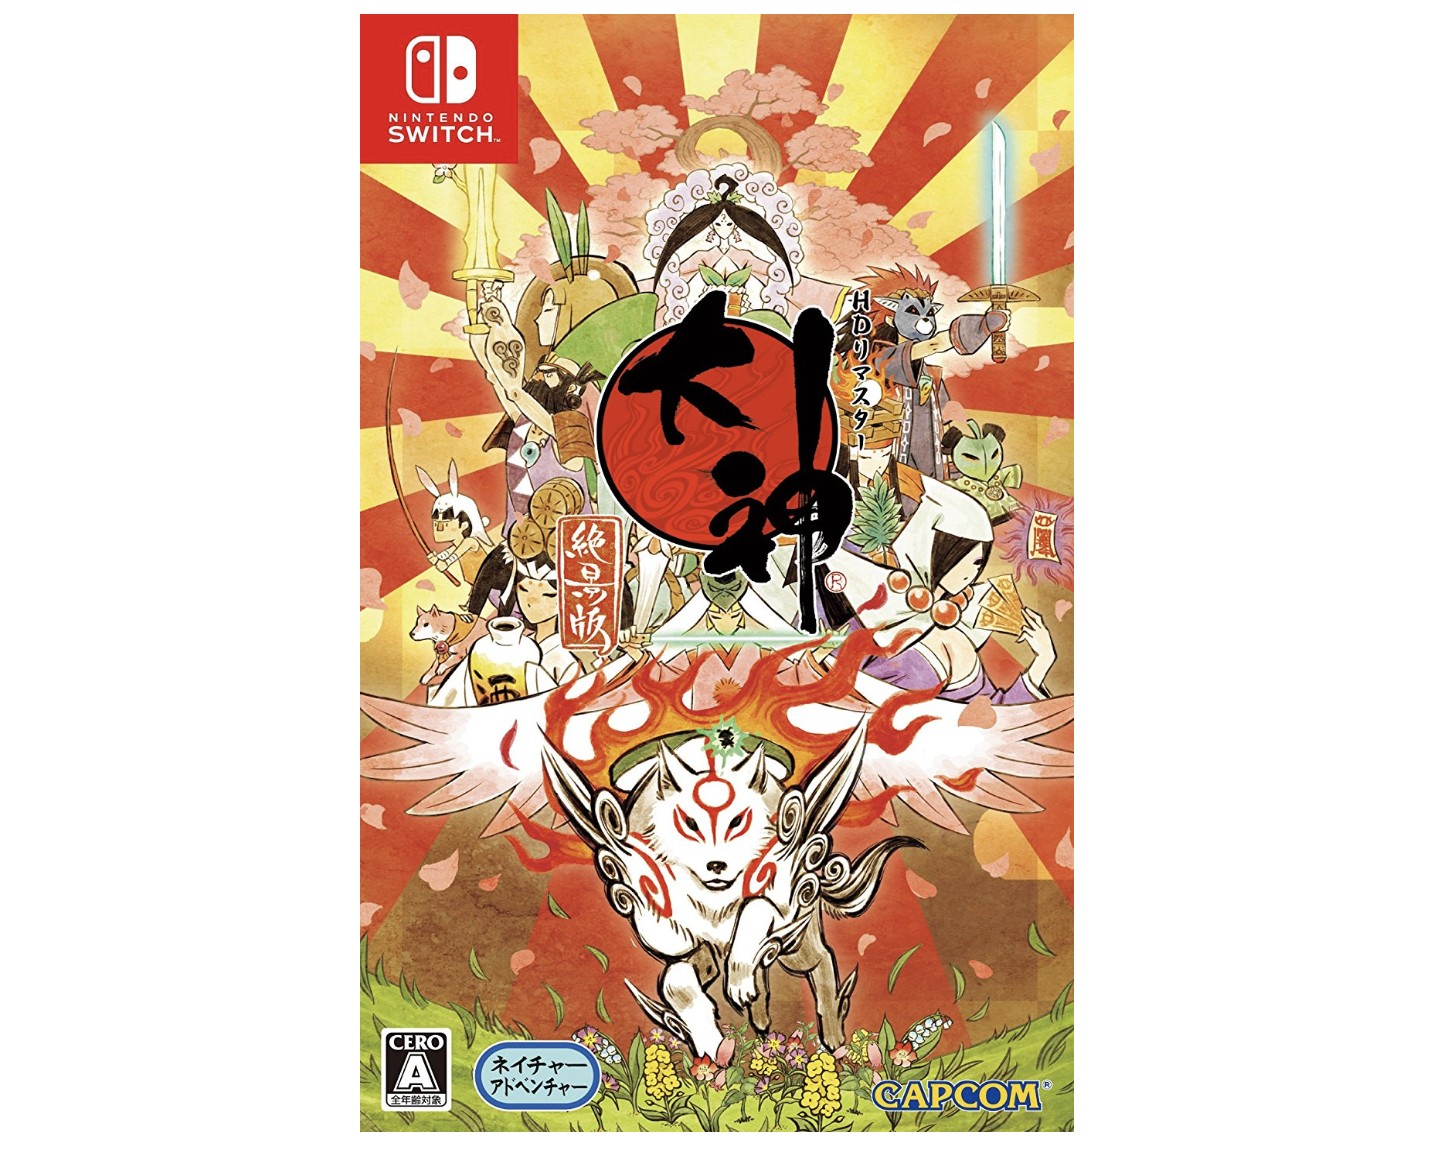 Okami HD confirmed for North America/Europe as digital download  $19.99/£15.99/€19.99, Page 6